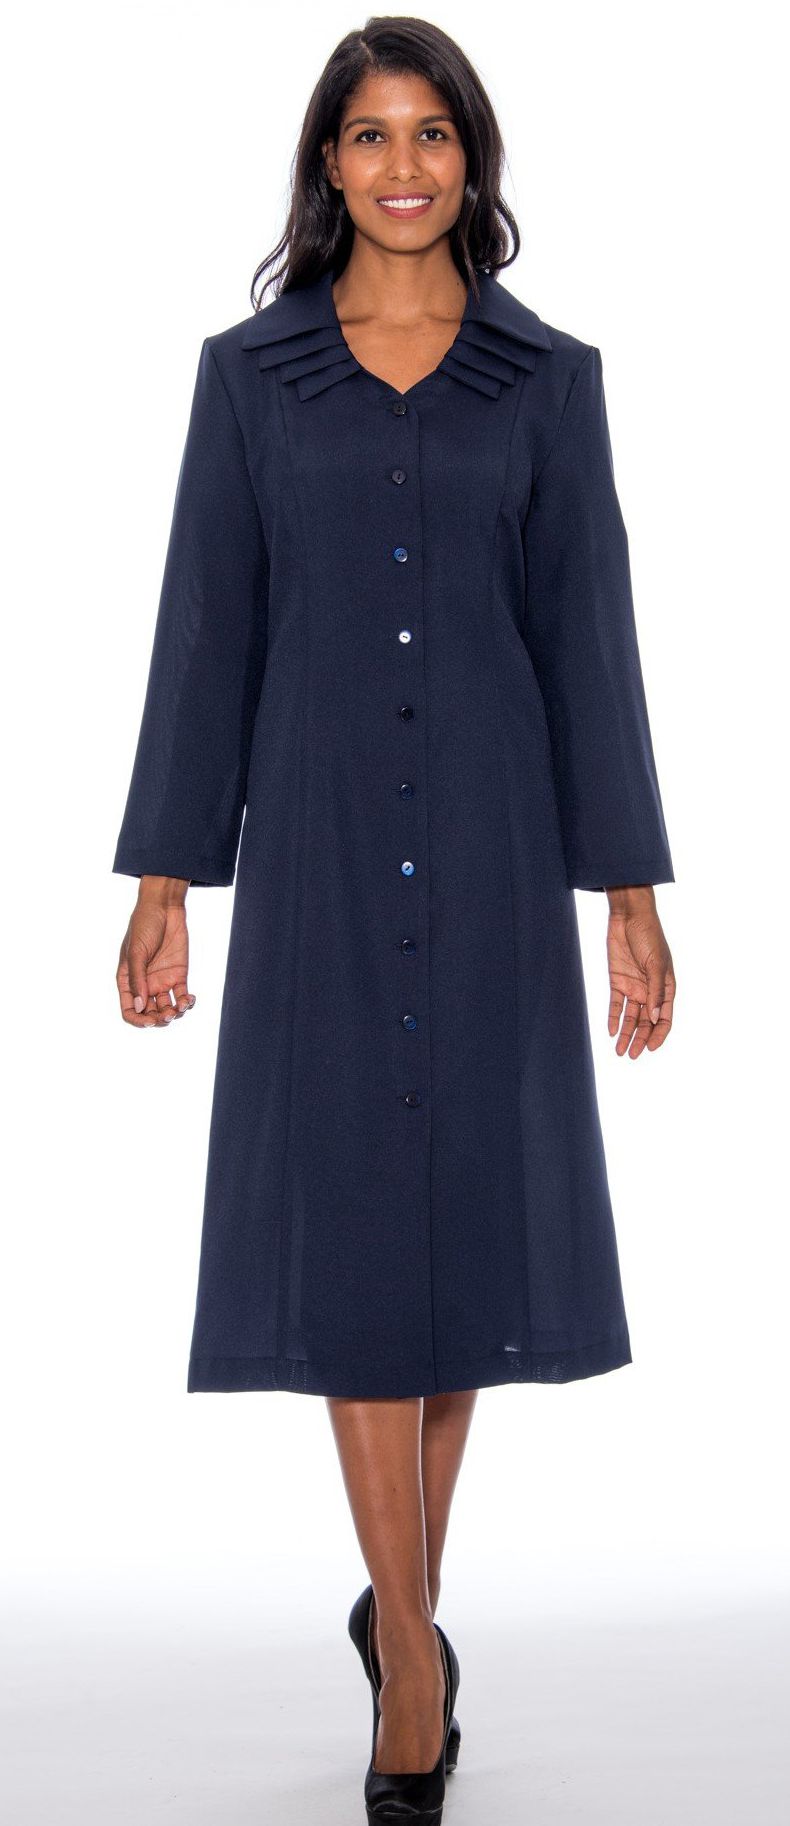 GMI Usher Dress 11721C-Navy - Church Suits For Less